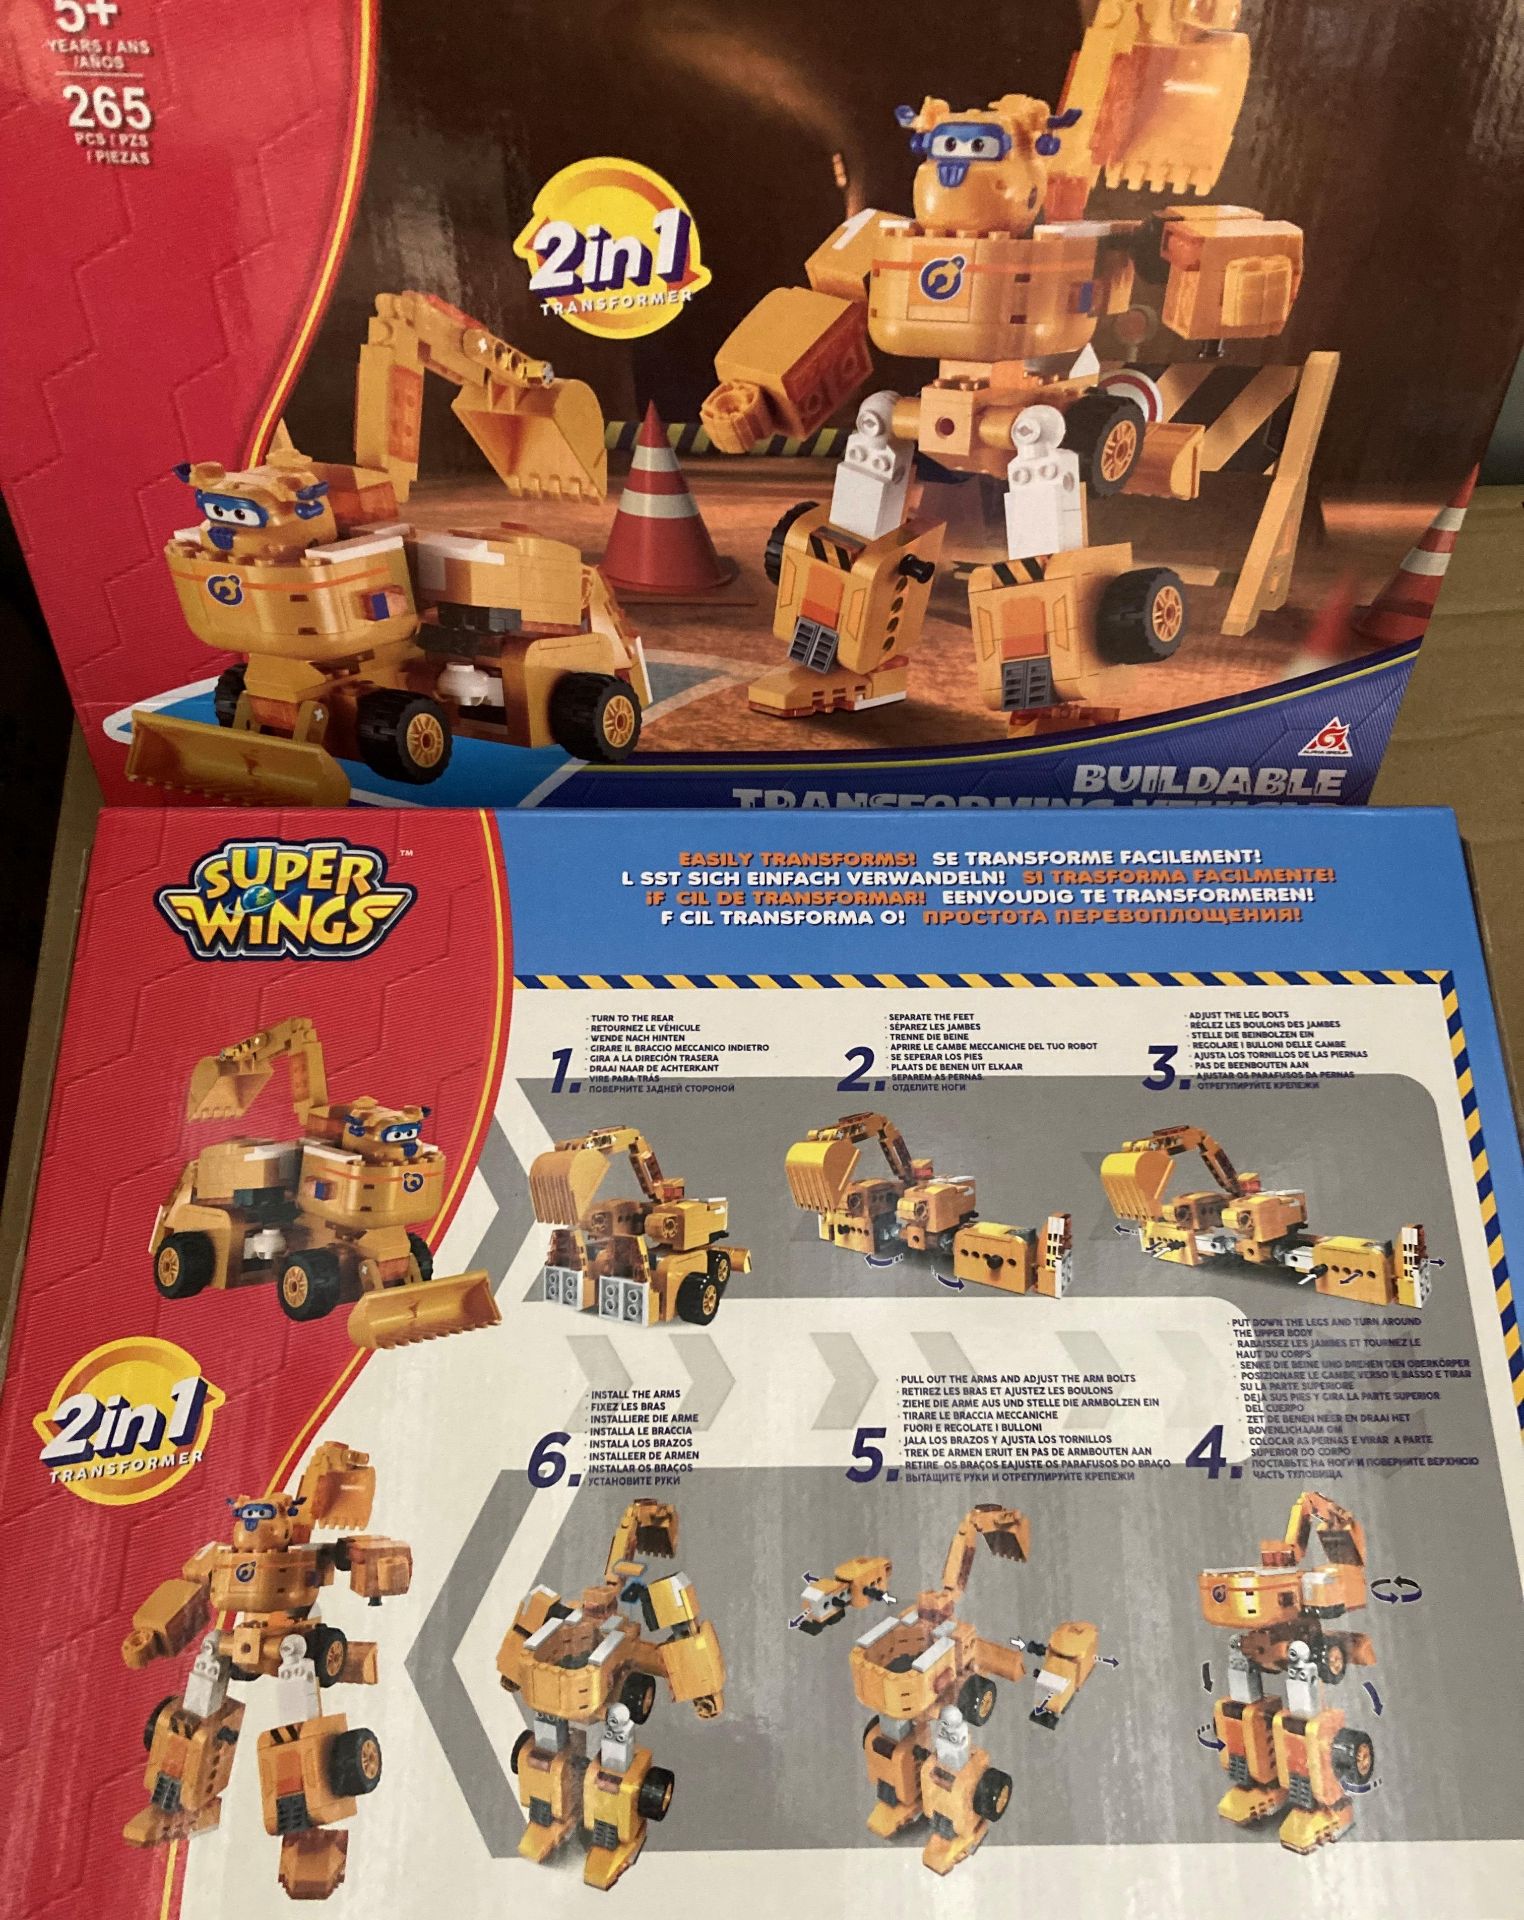 9 x Super Wings Buildable Transforming Vehicle Donnie Wise Block kits (saleroom location: sport - Image 3 of 3